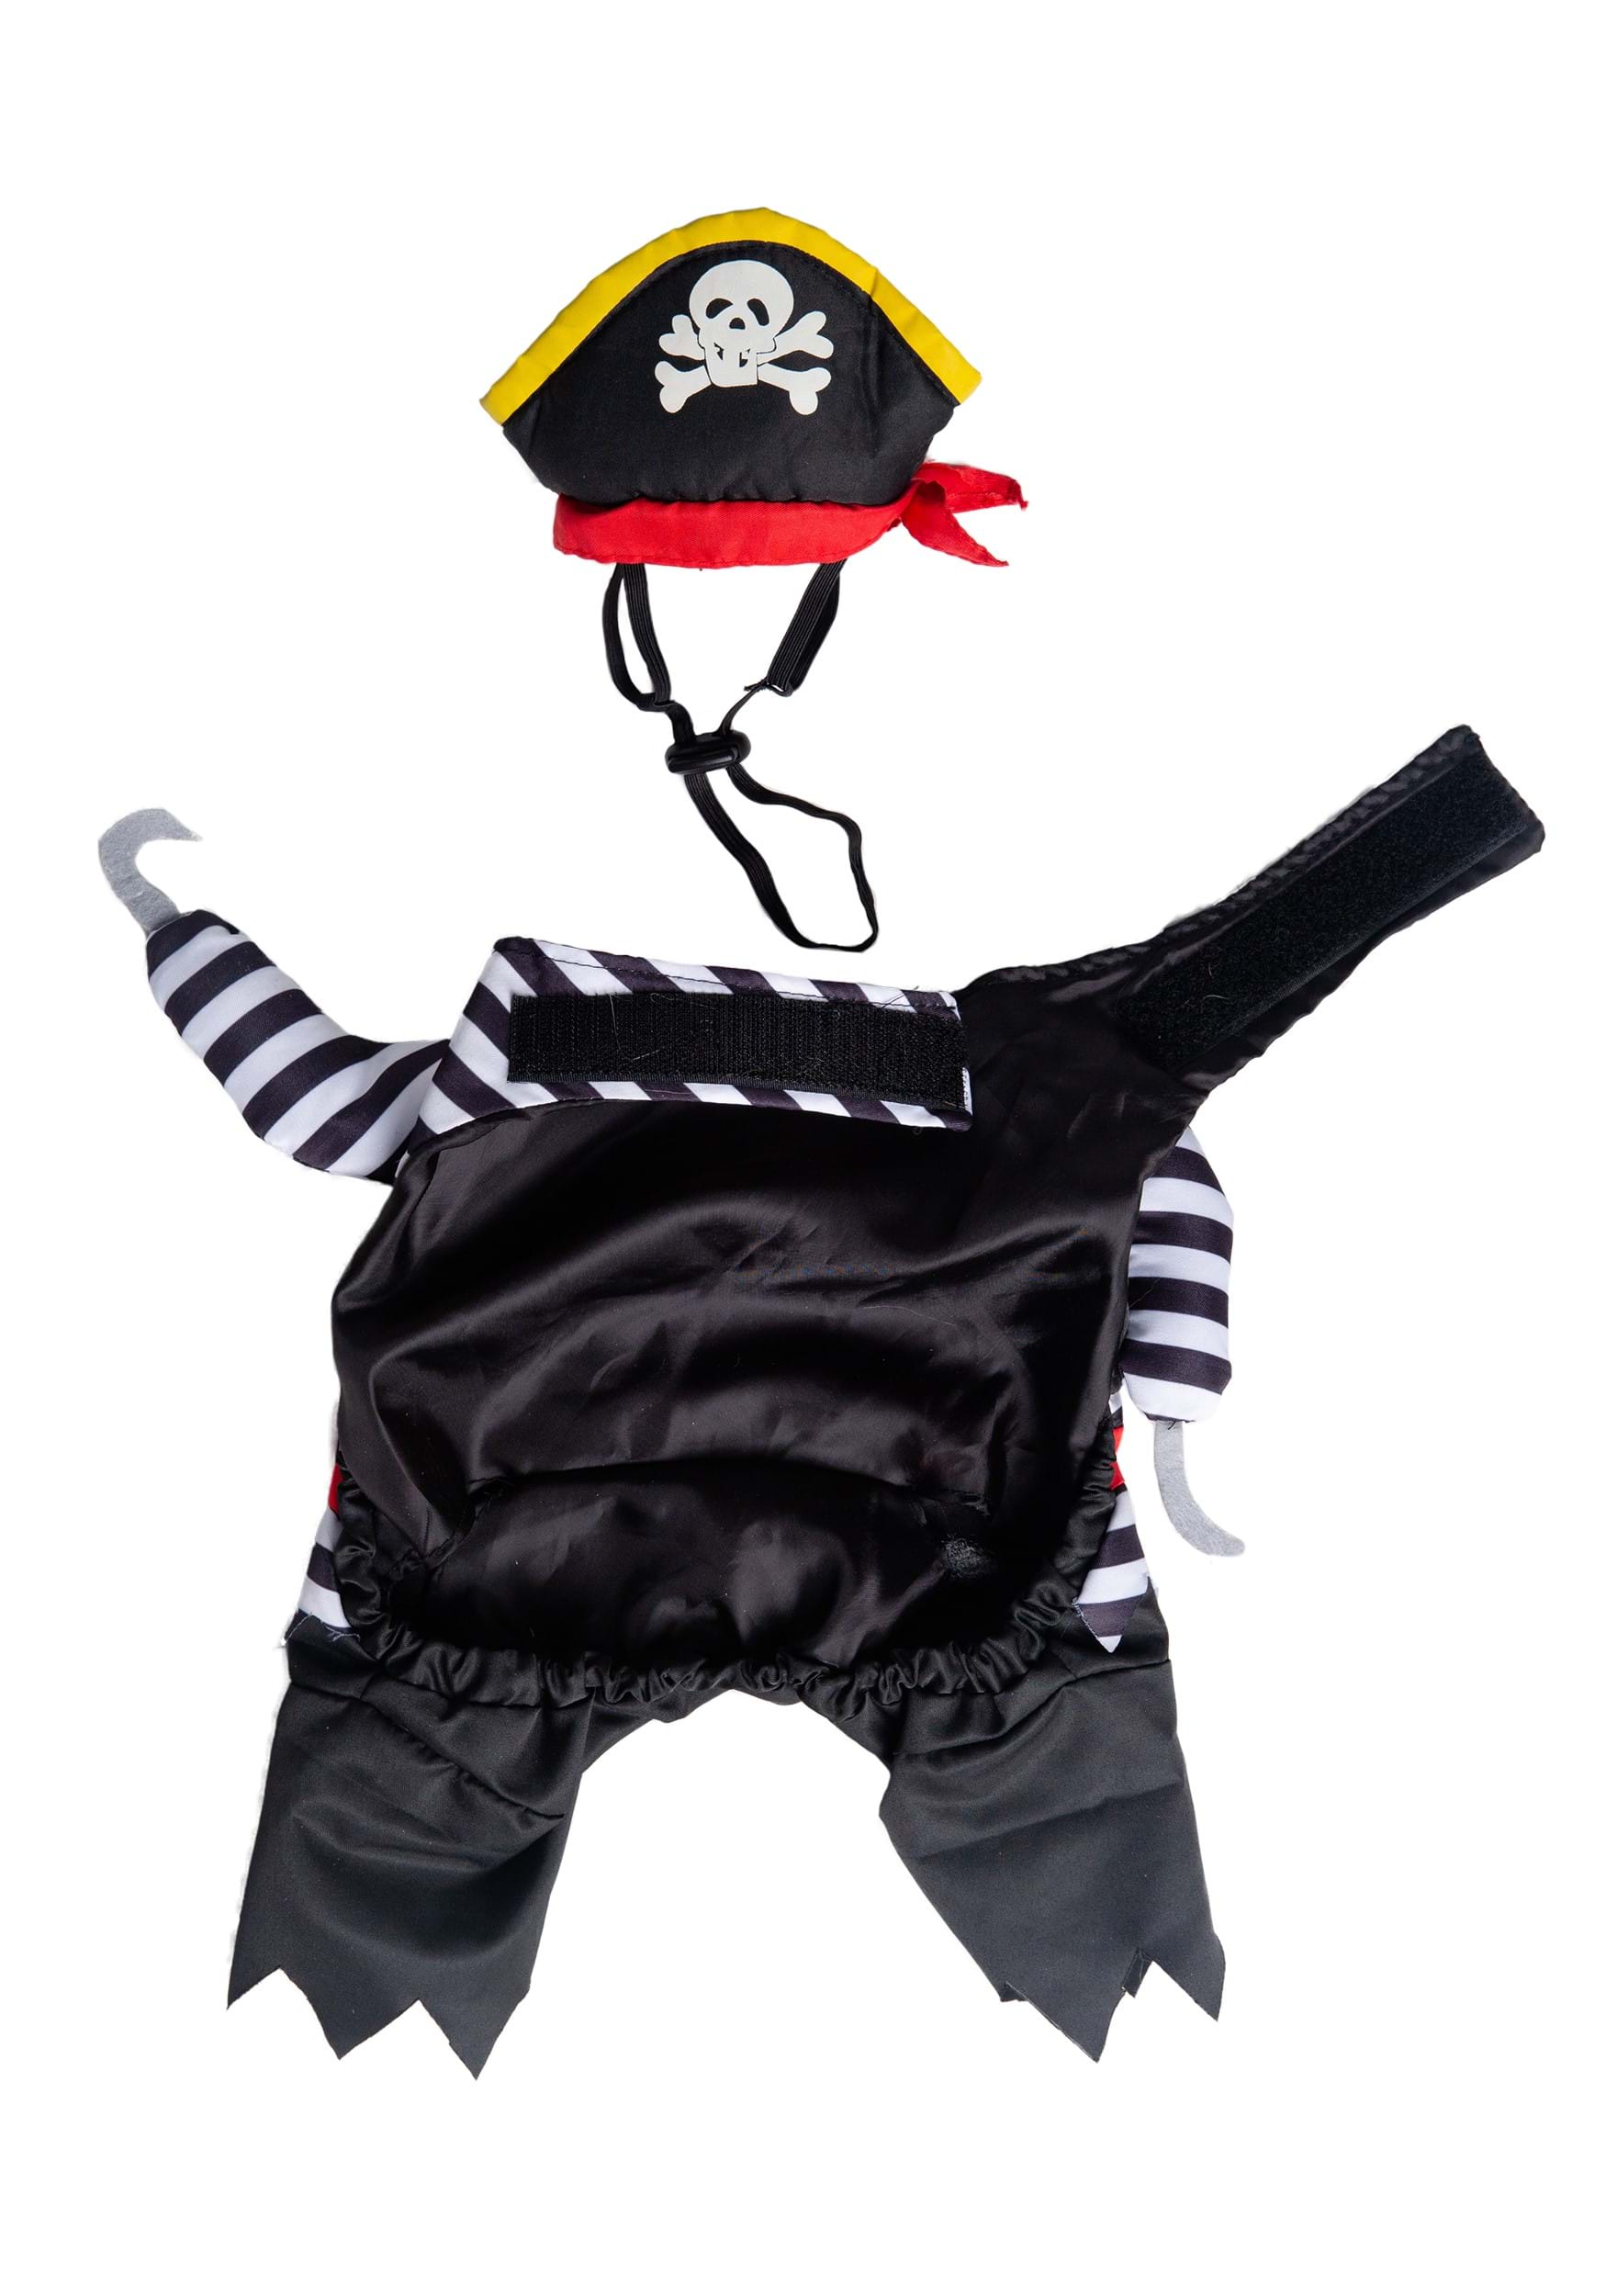 Pirate Costume For Pets